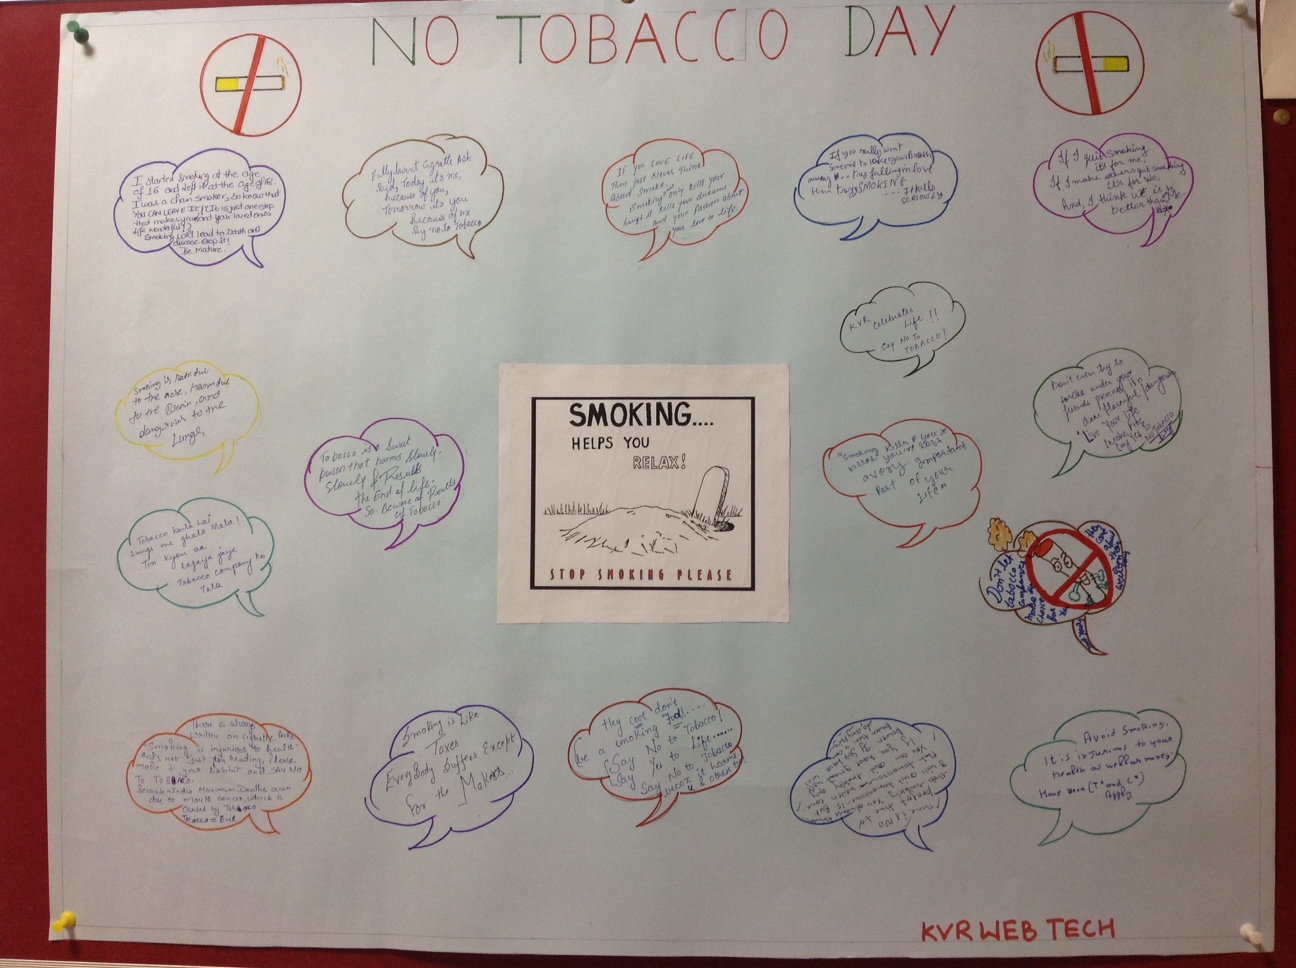 NO TOBACCO DAY- MESSAGE FROM KVR WEBTECH